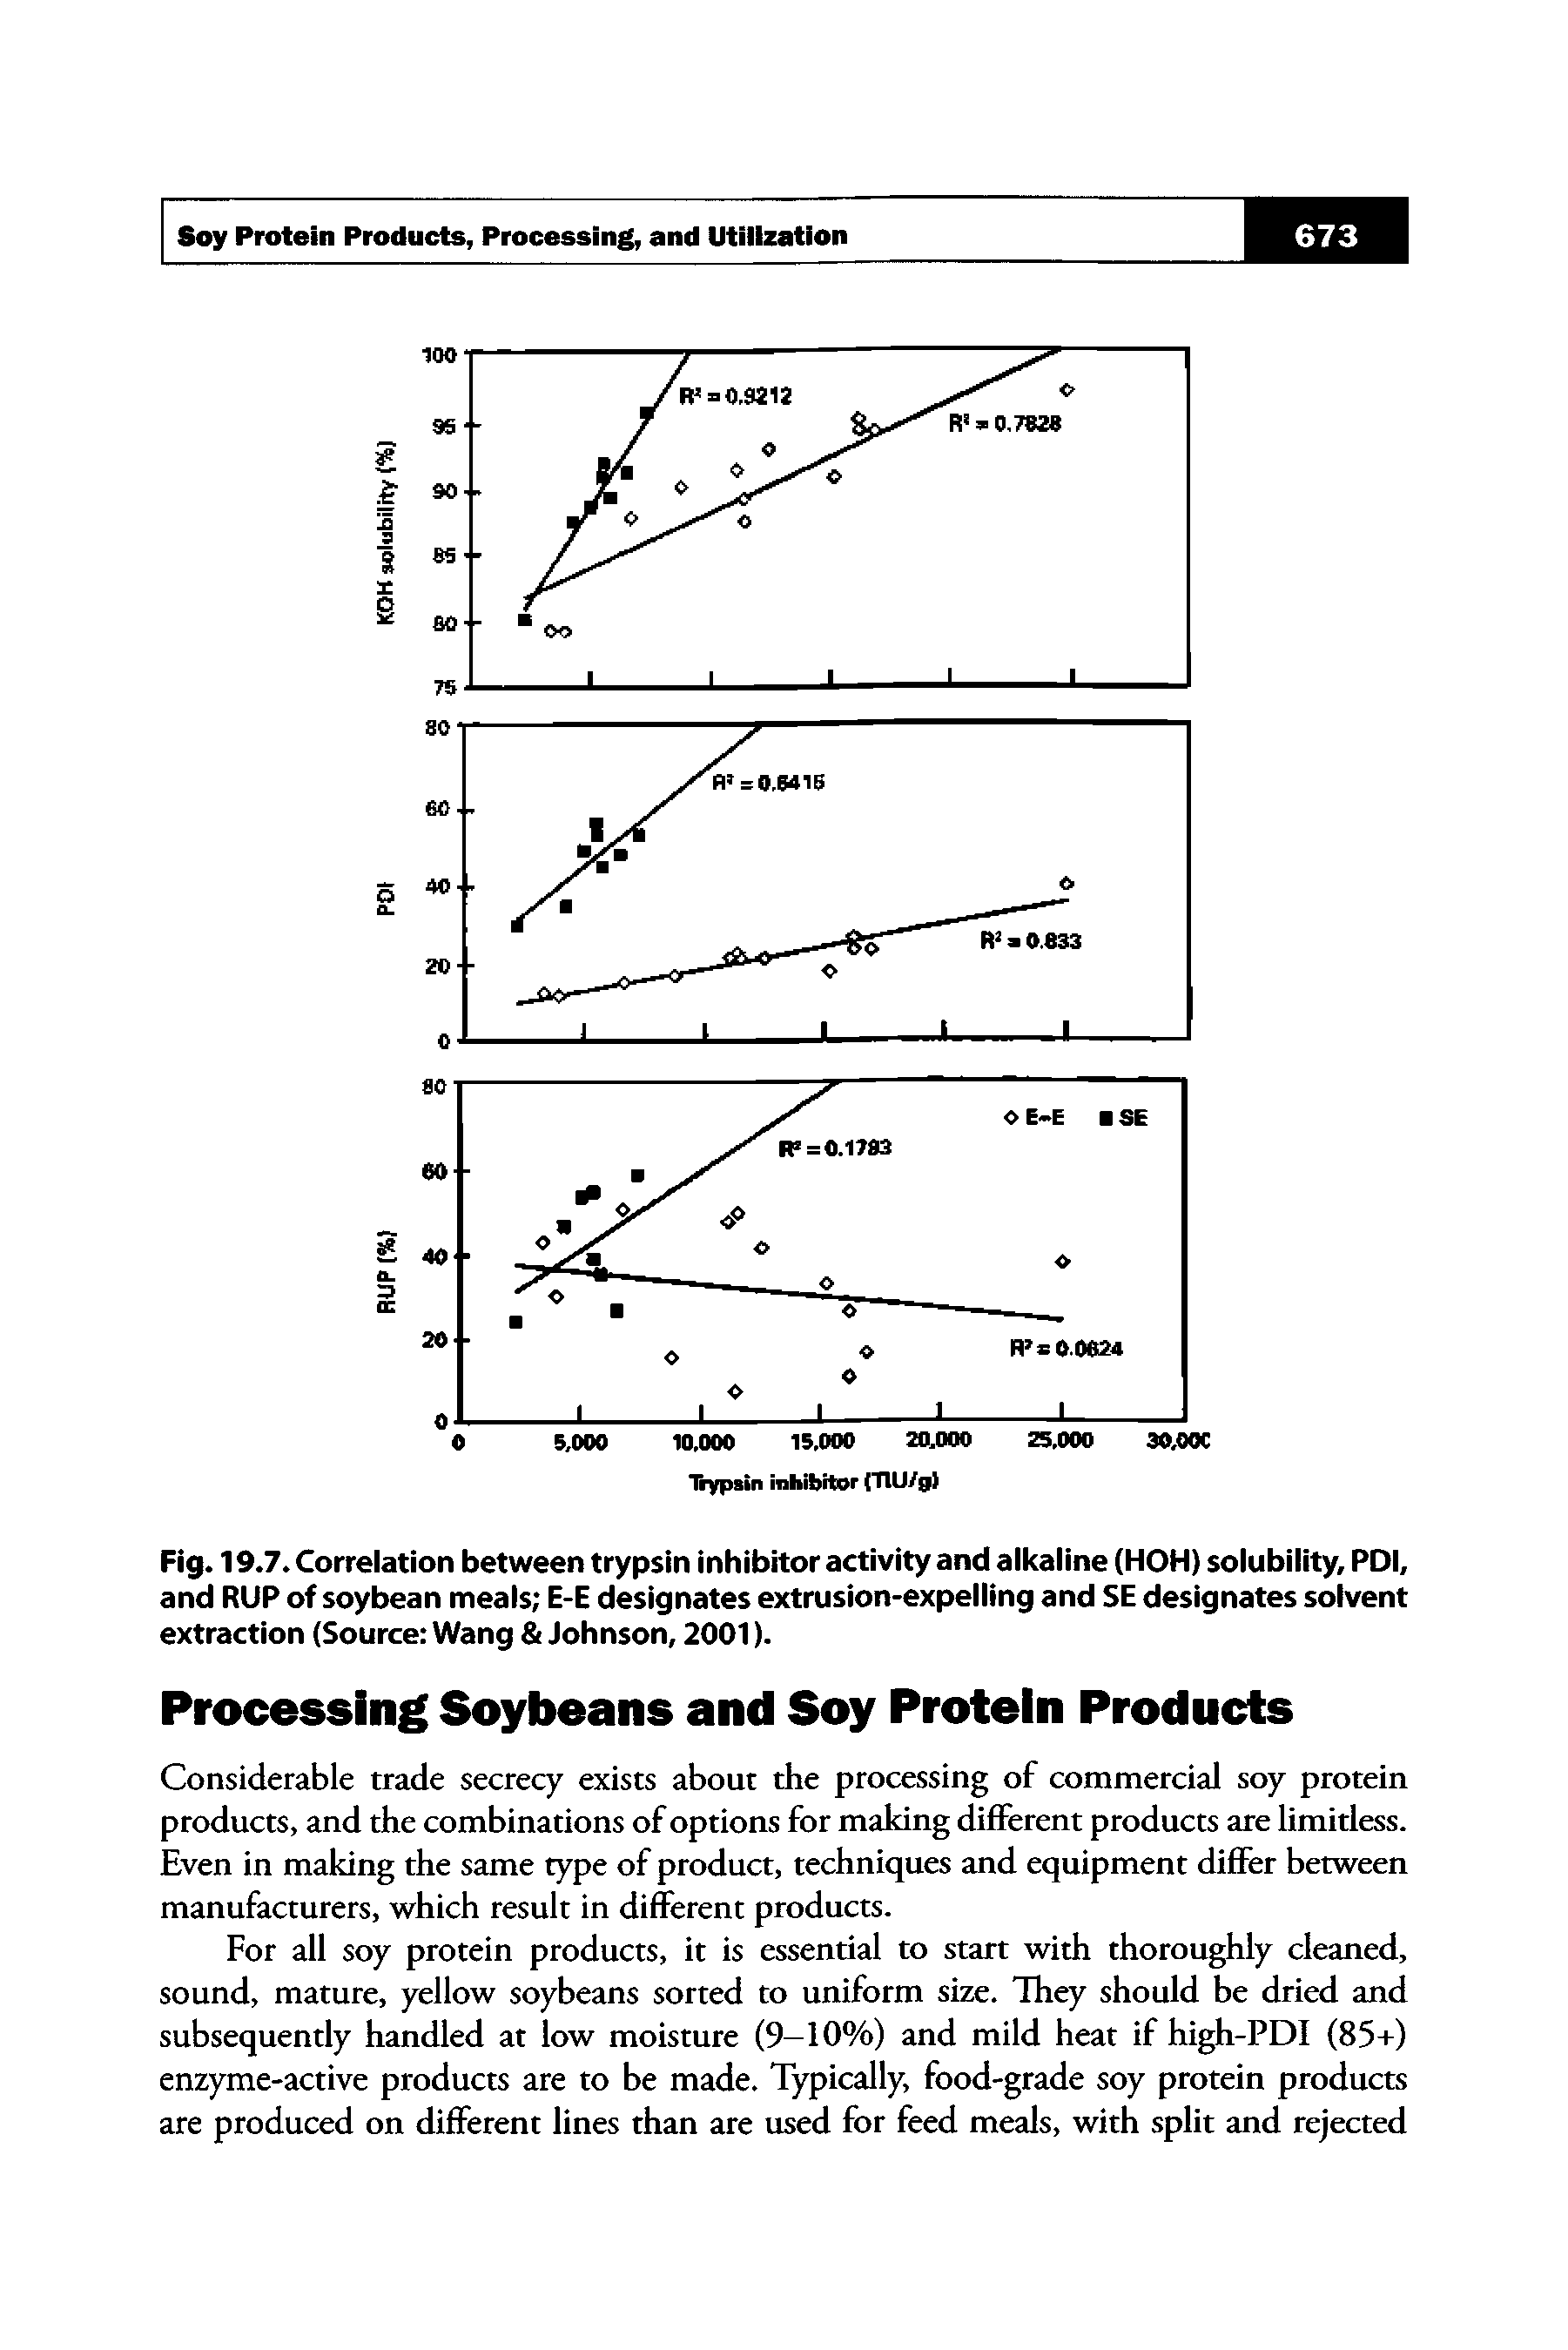 Fig. 19.7. Correlation between trypsin inhibitor activity and alkaline (HOH) solubility, PDI, and RUP of soybean meals E-E designates extrusion-expelling and SE designates solvent extraction (Source Wang Johnson, 2001).